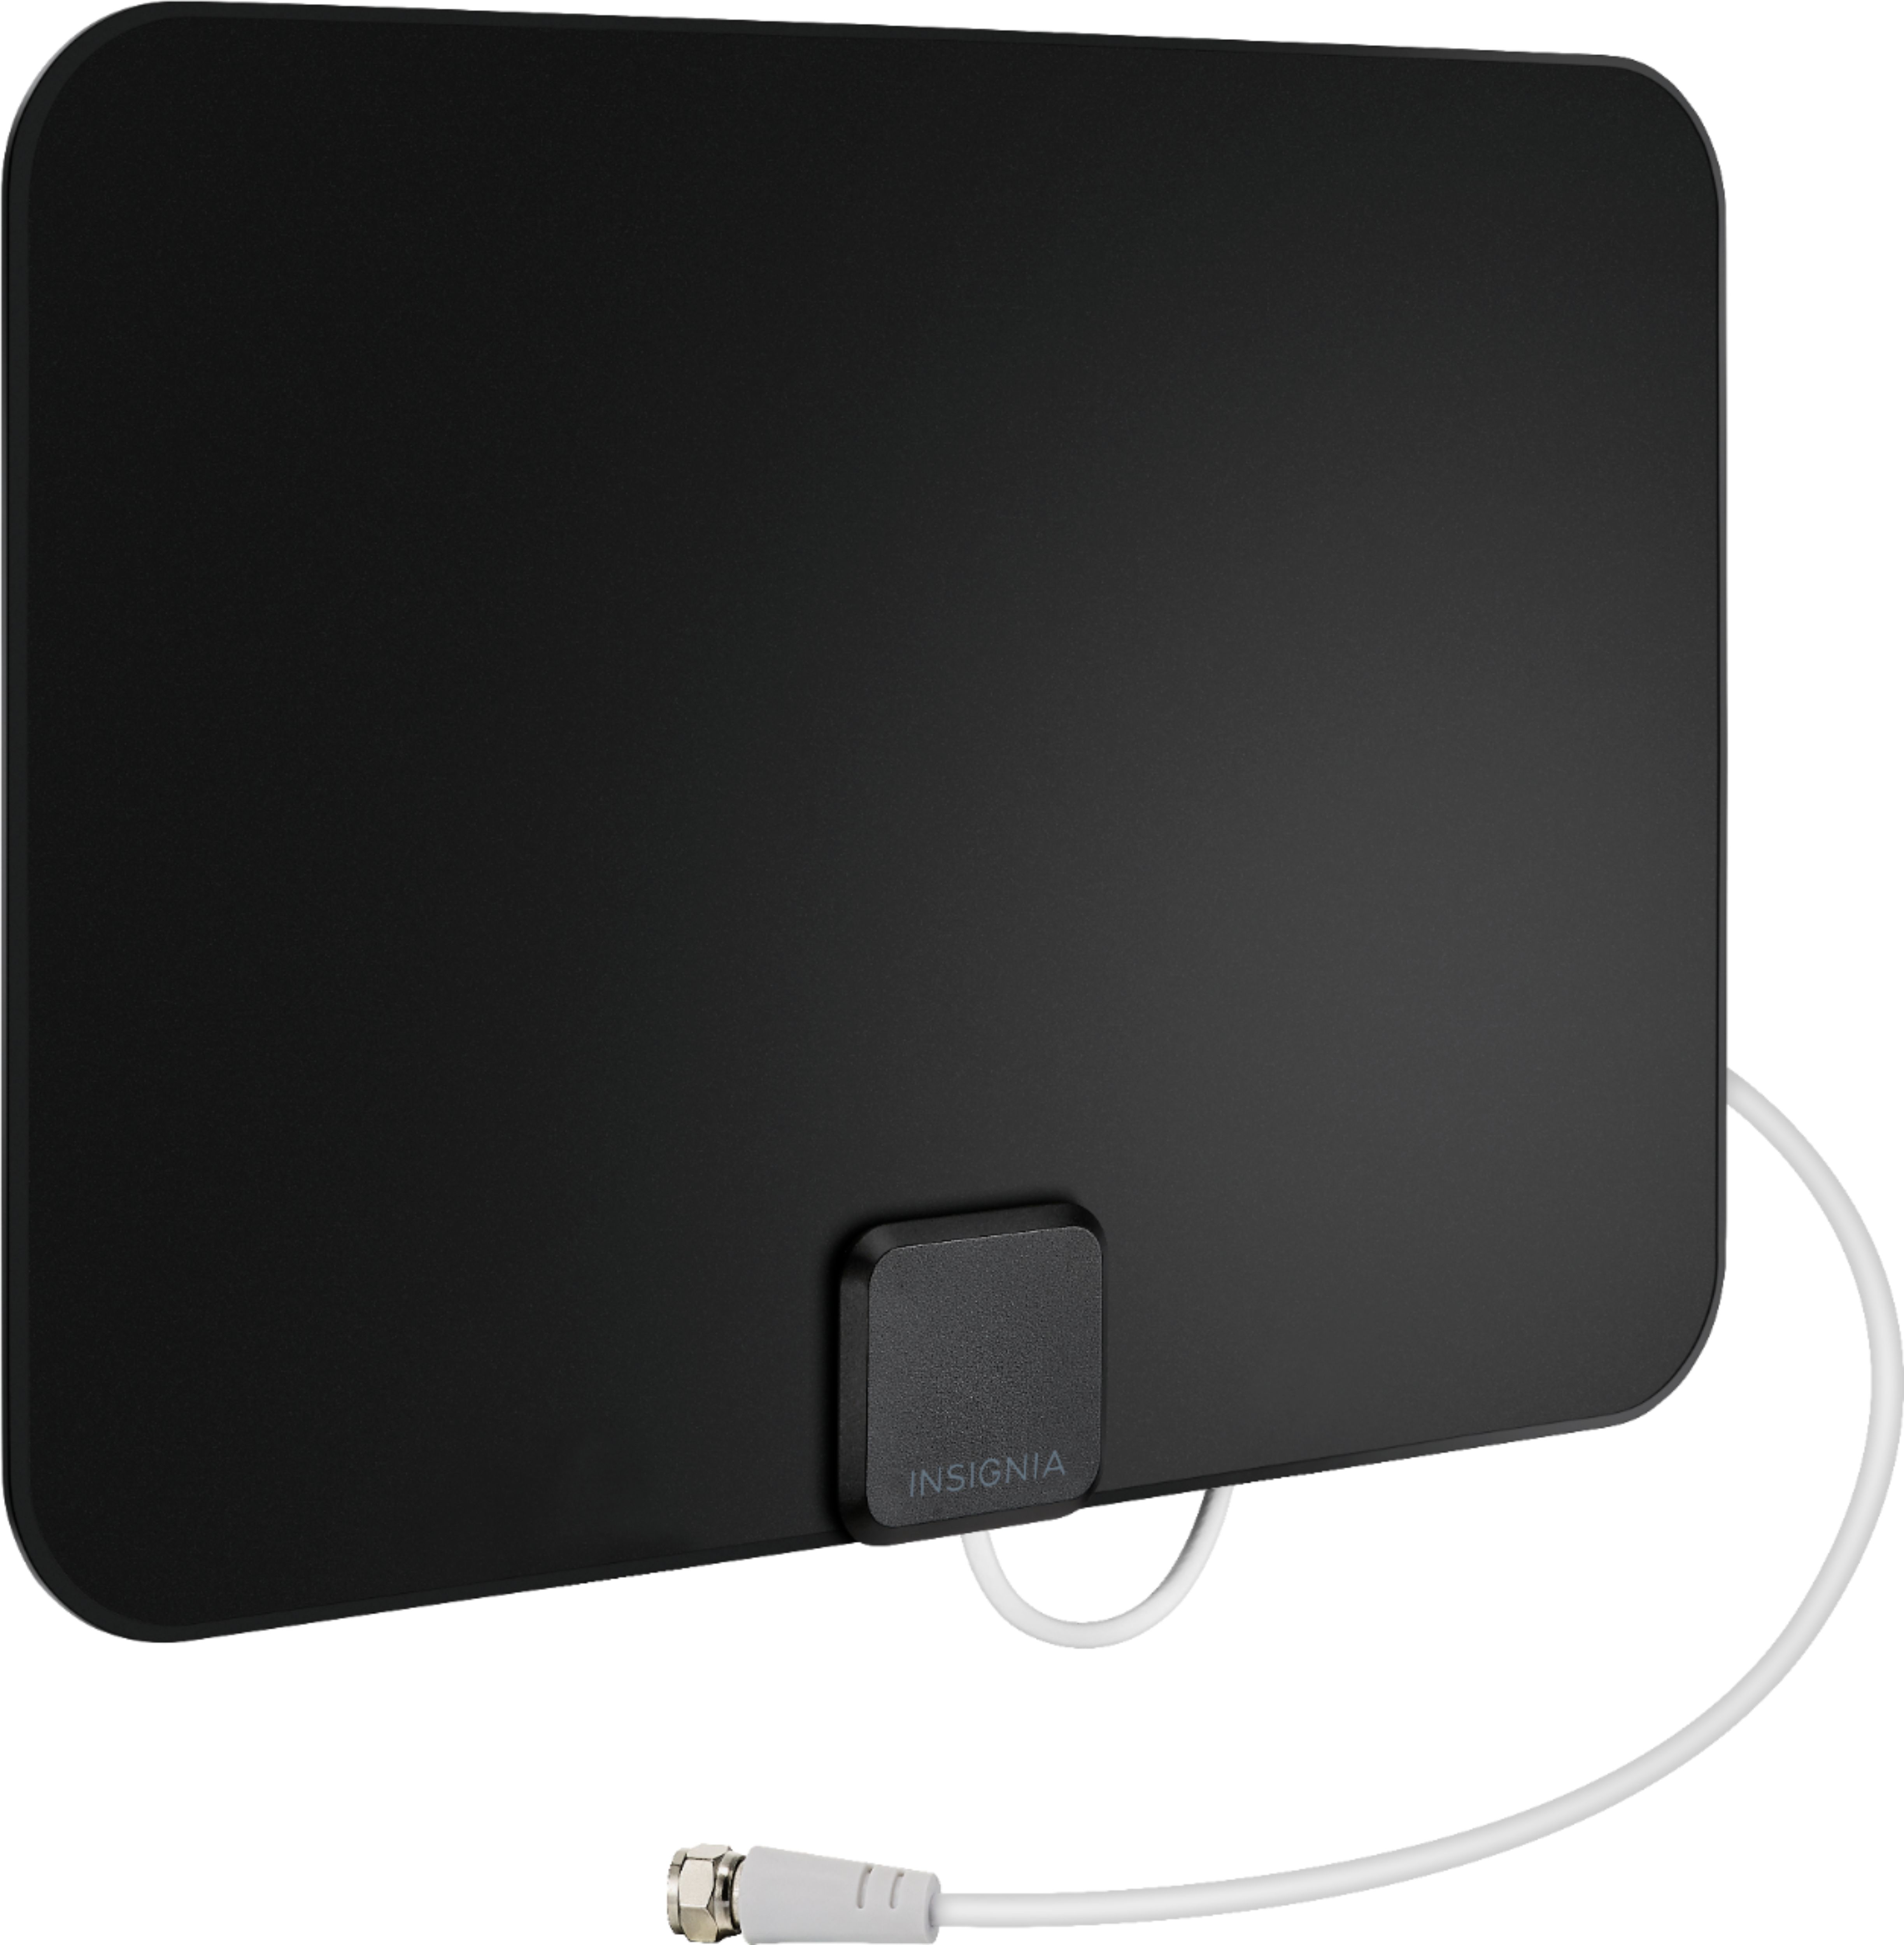 Insignia Ultra Thin Indoor Plate HDTV Antenna Black/White (Reversible) + Free Shipping/Store Pickup at Bestbuy $10